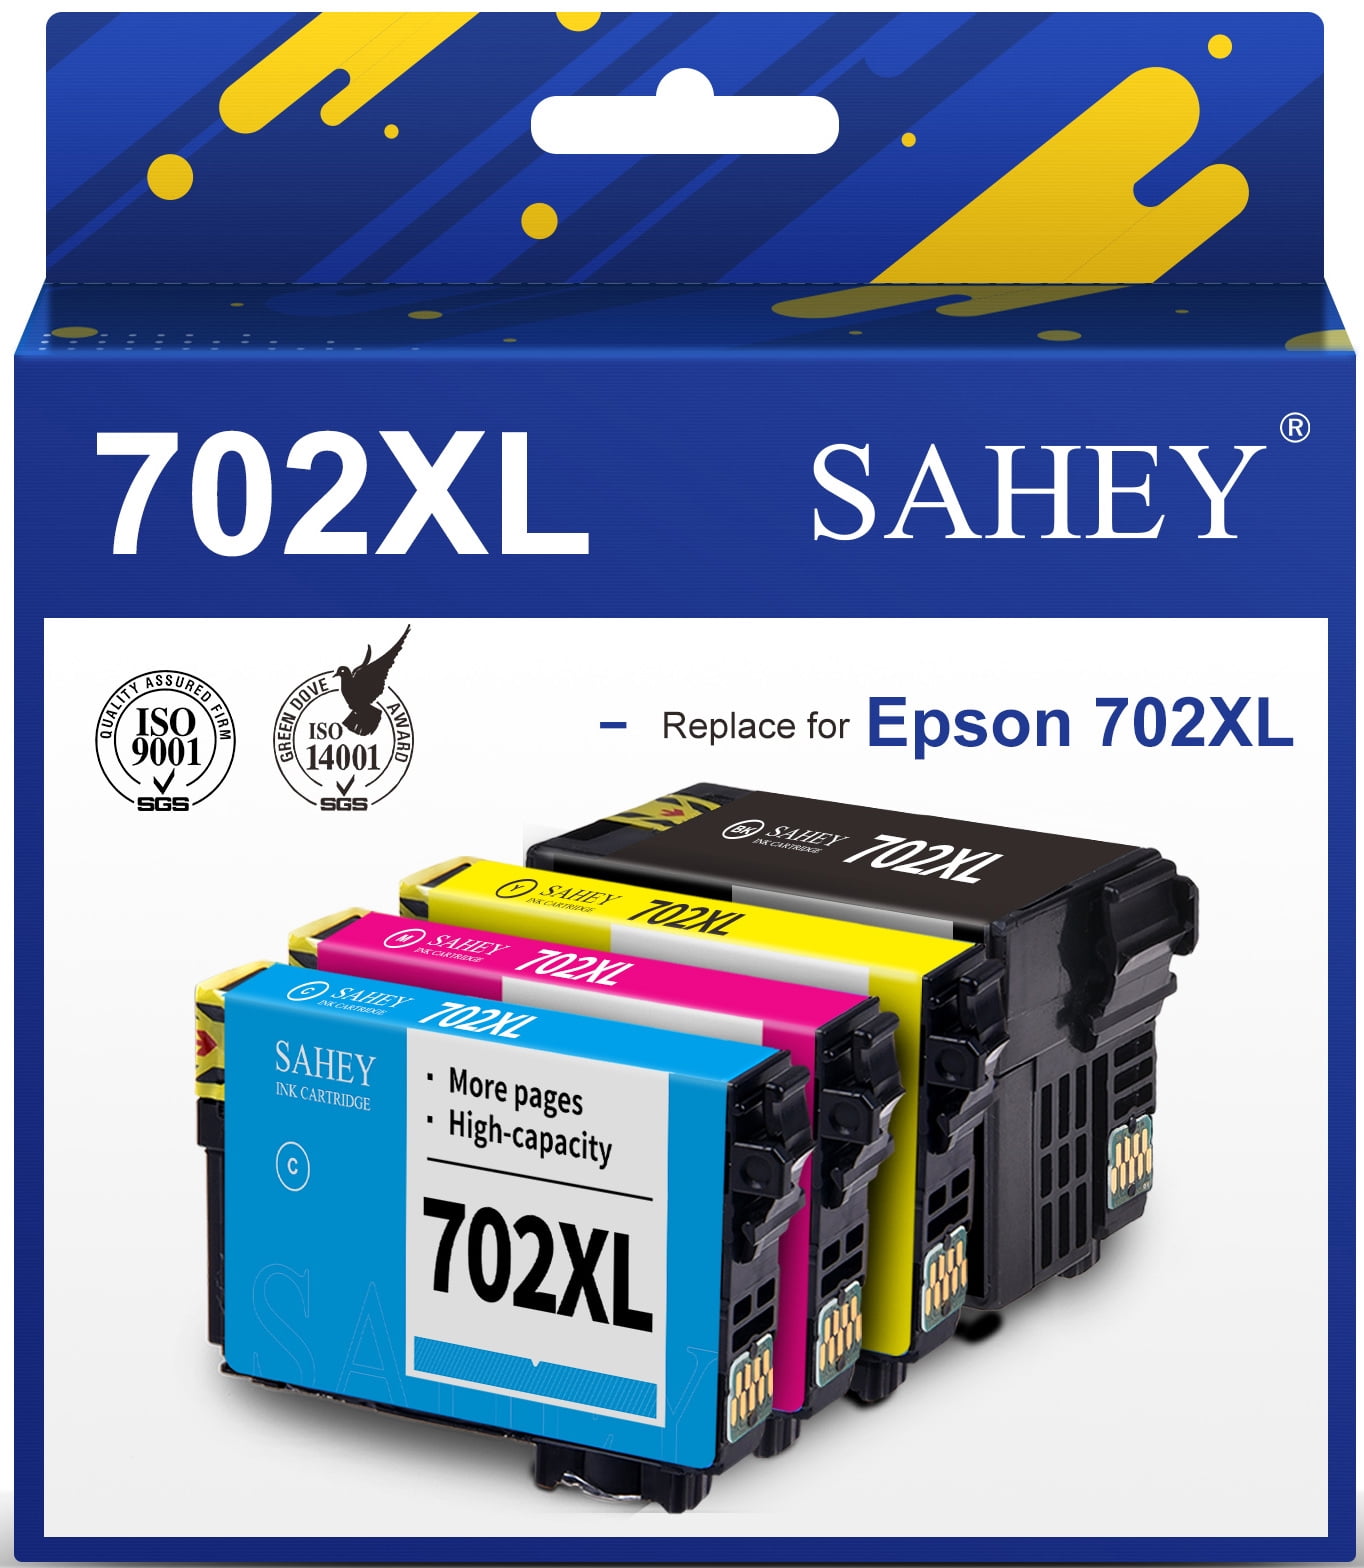 Unravel Kemiker svulst 702XL Ink Cartridge for Epson 702 XL Ink Printer and 702 Ink Printer Combo  Pack to Use with Epson Workforce Pro WF-3720 WF-3730 WF-3733 Printer Ink (1  Black 1 Cyan 1 Magenta 1 Yellow,4 Pack) - Walmart.com